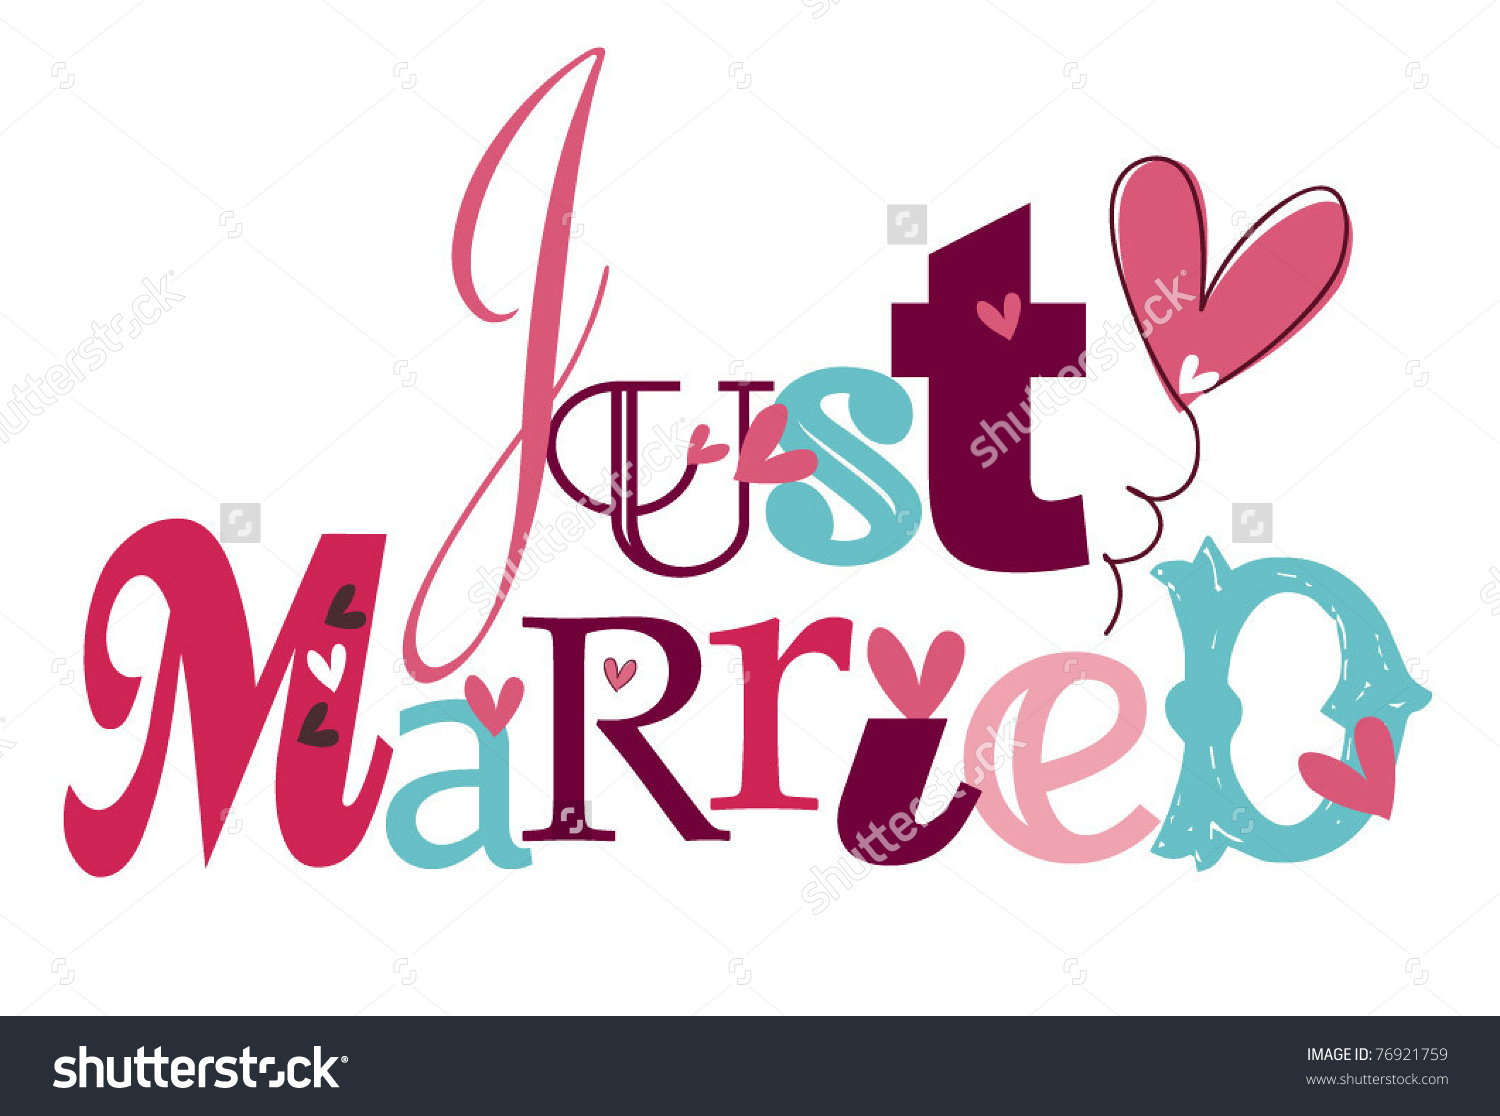 Just Married #2